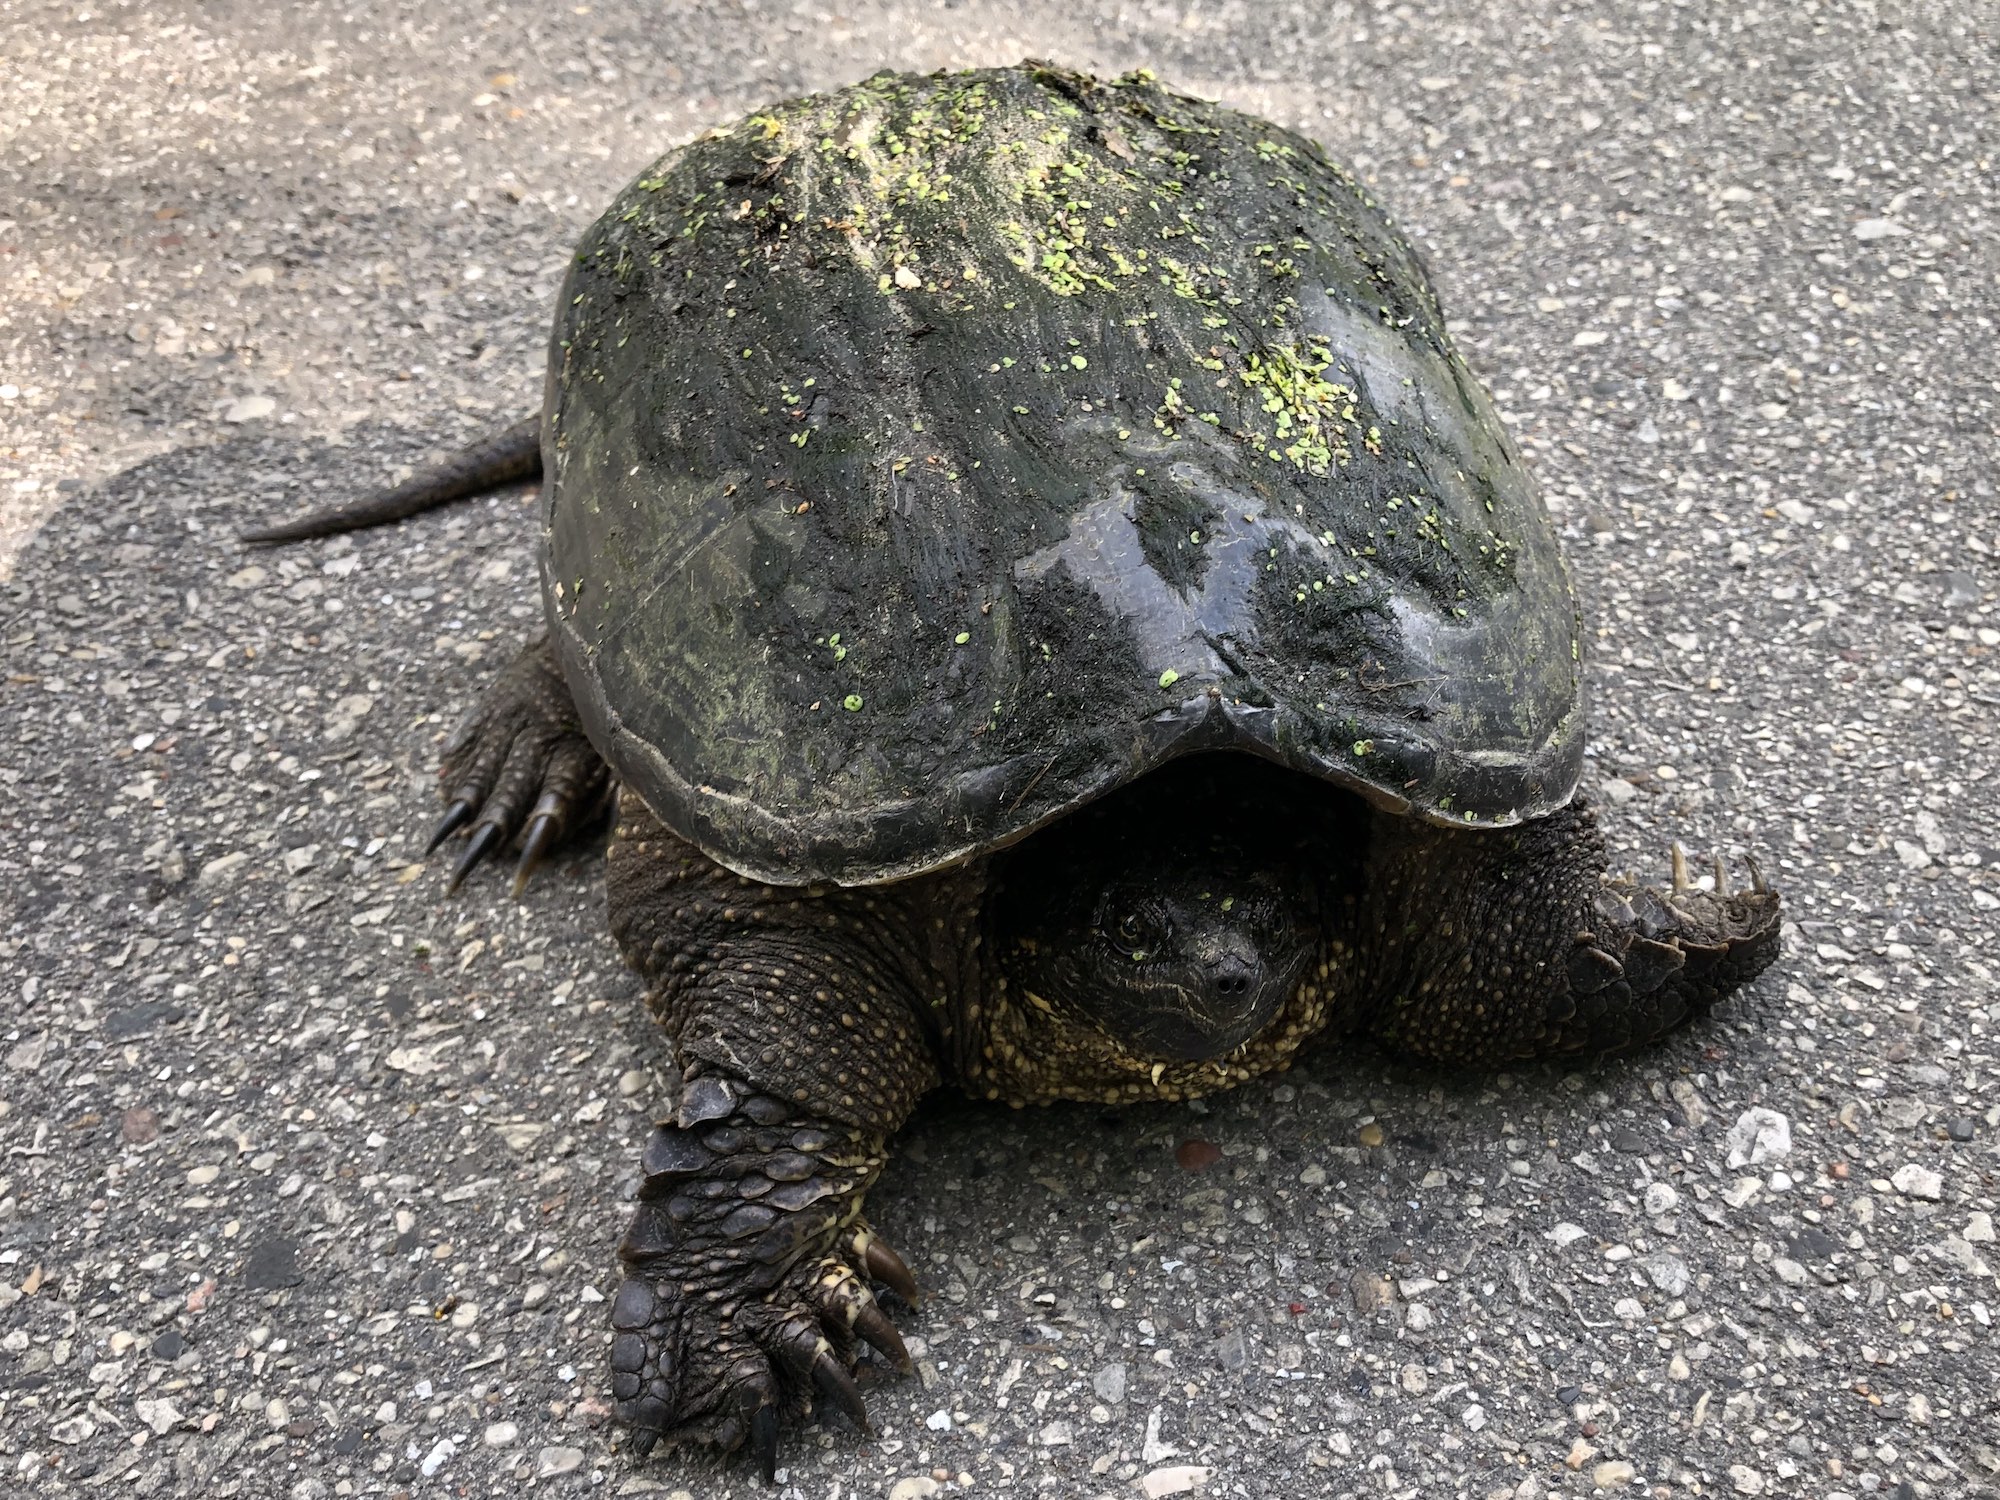 Snapping Turtle walking across Arboretum  Drive in UW Arboretum in Madison, Wisconsin on May 22, 2021.